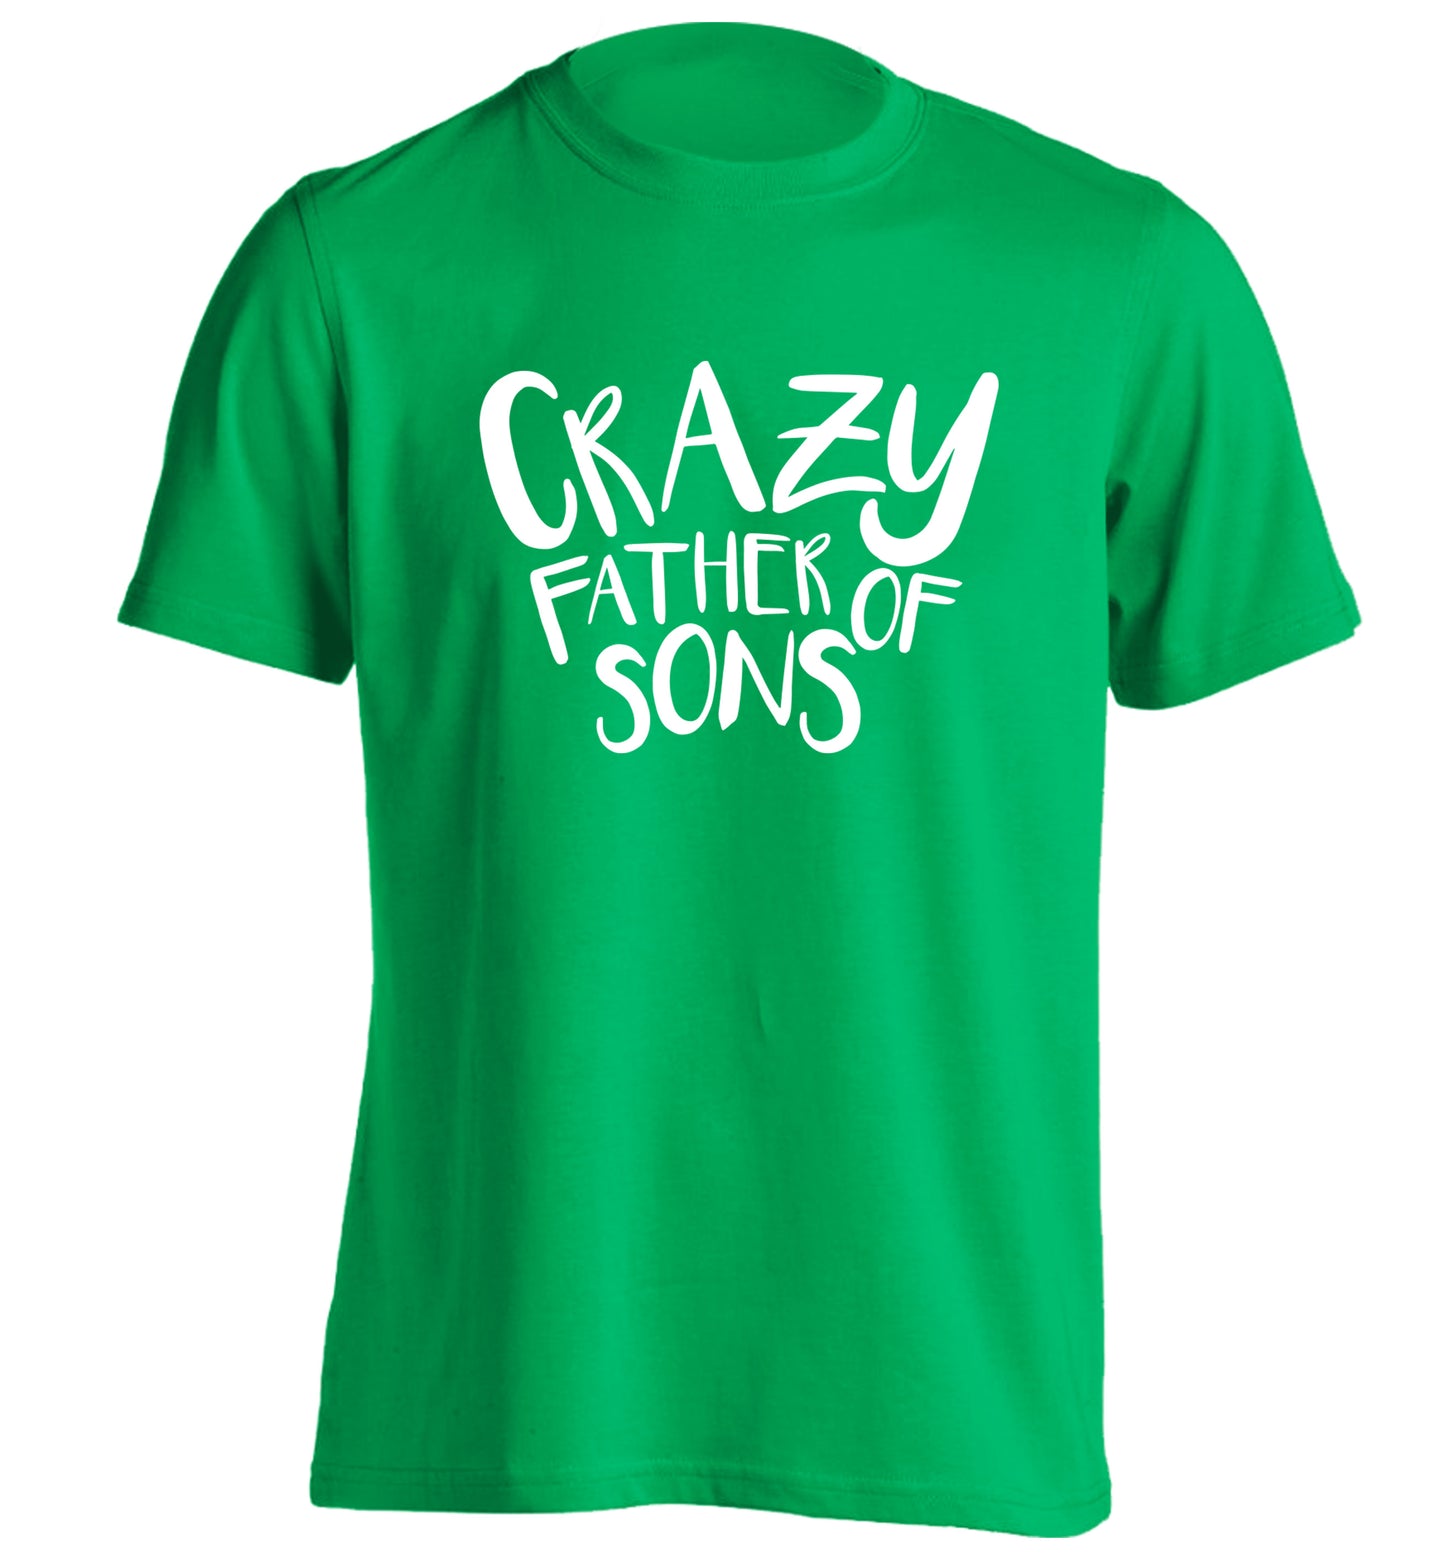 Crazy father of sons adults unisex green Tshirt 2XL